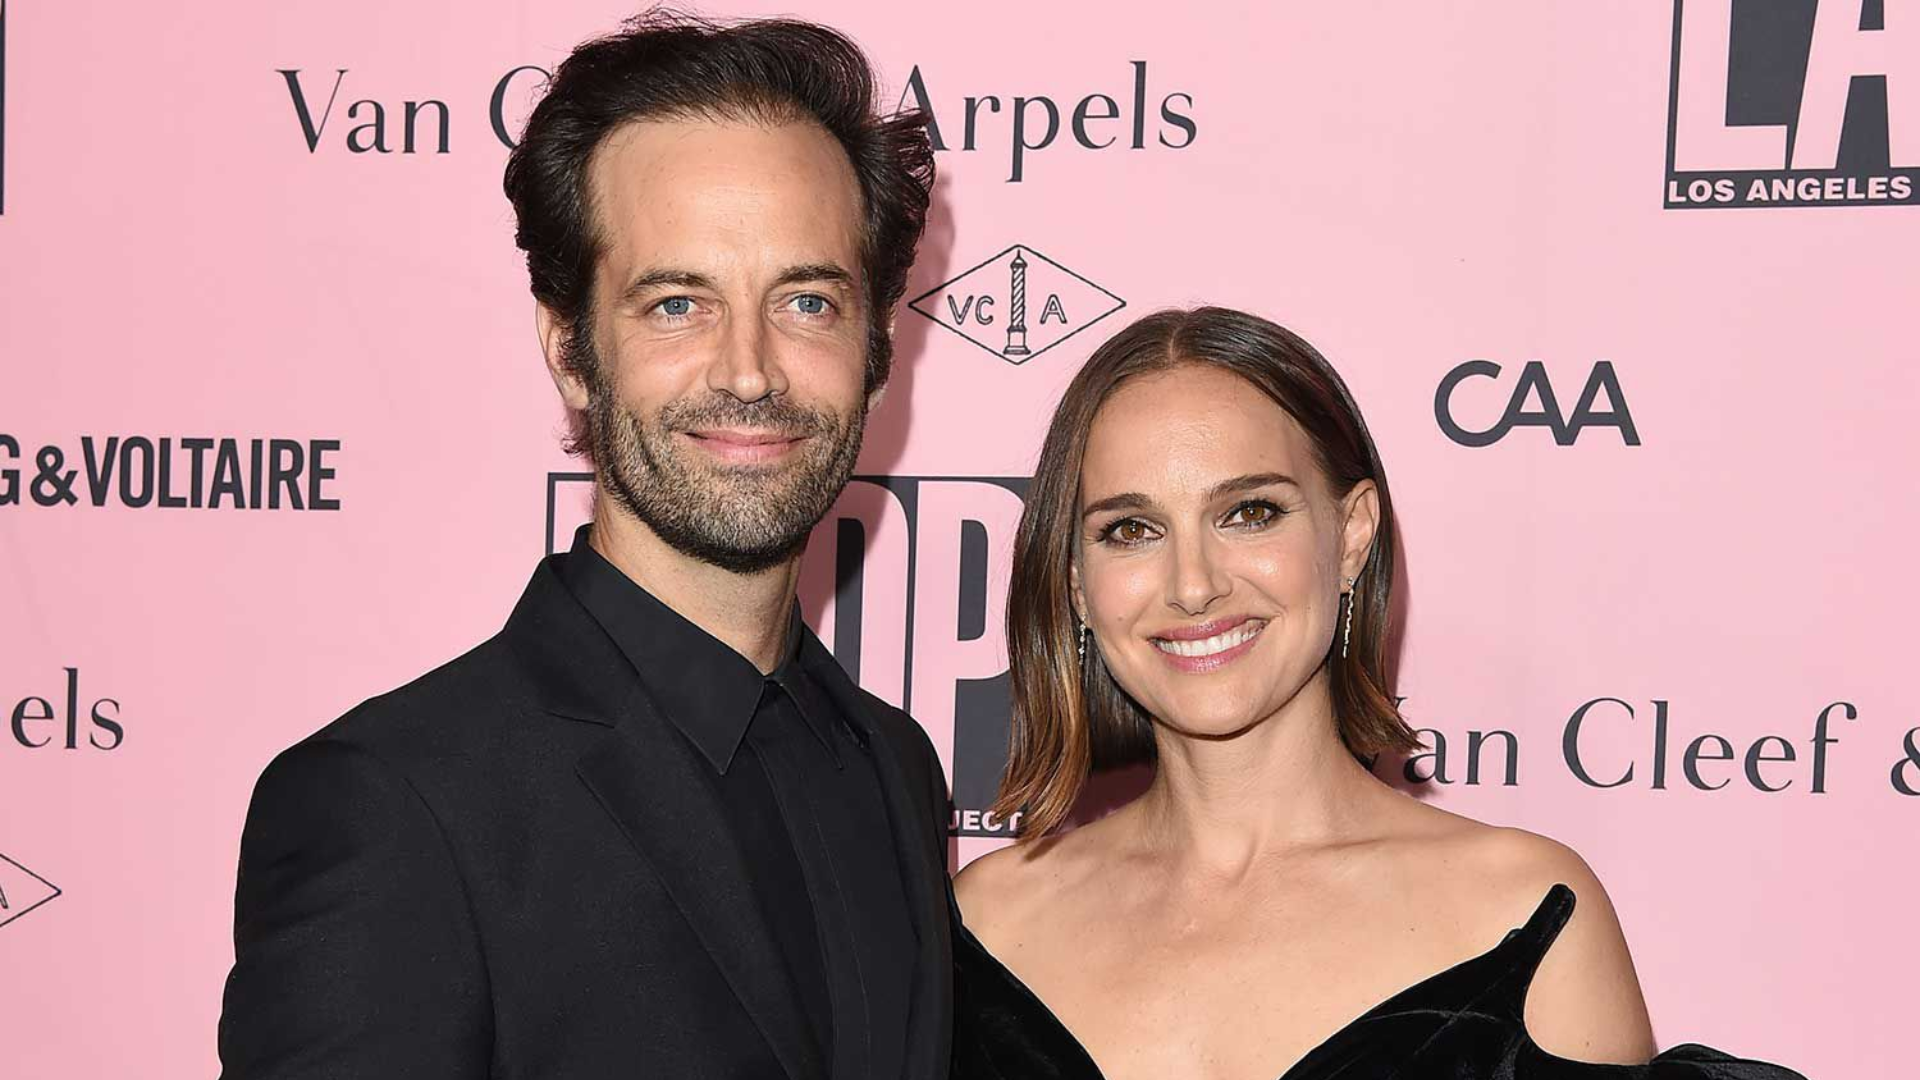 Natalie Portman Has Finalized Her Divorce With Husband Benjamin Millepied After 11 Years Of Marriage: Report